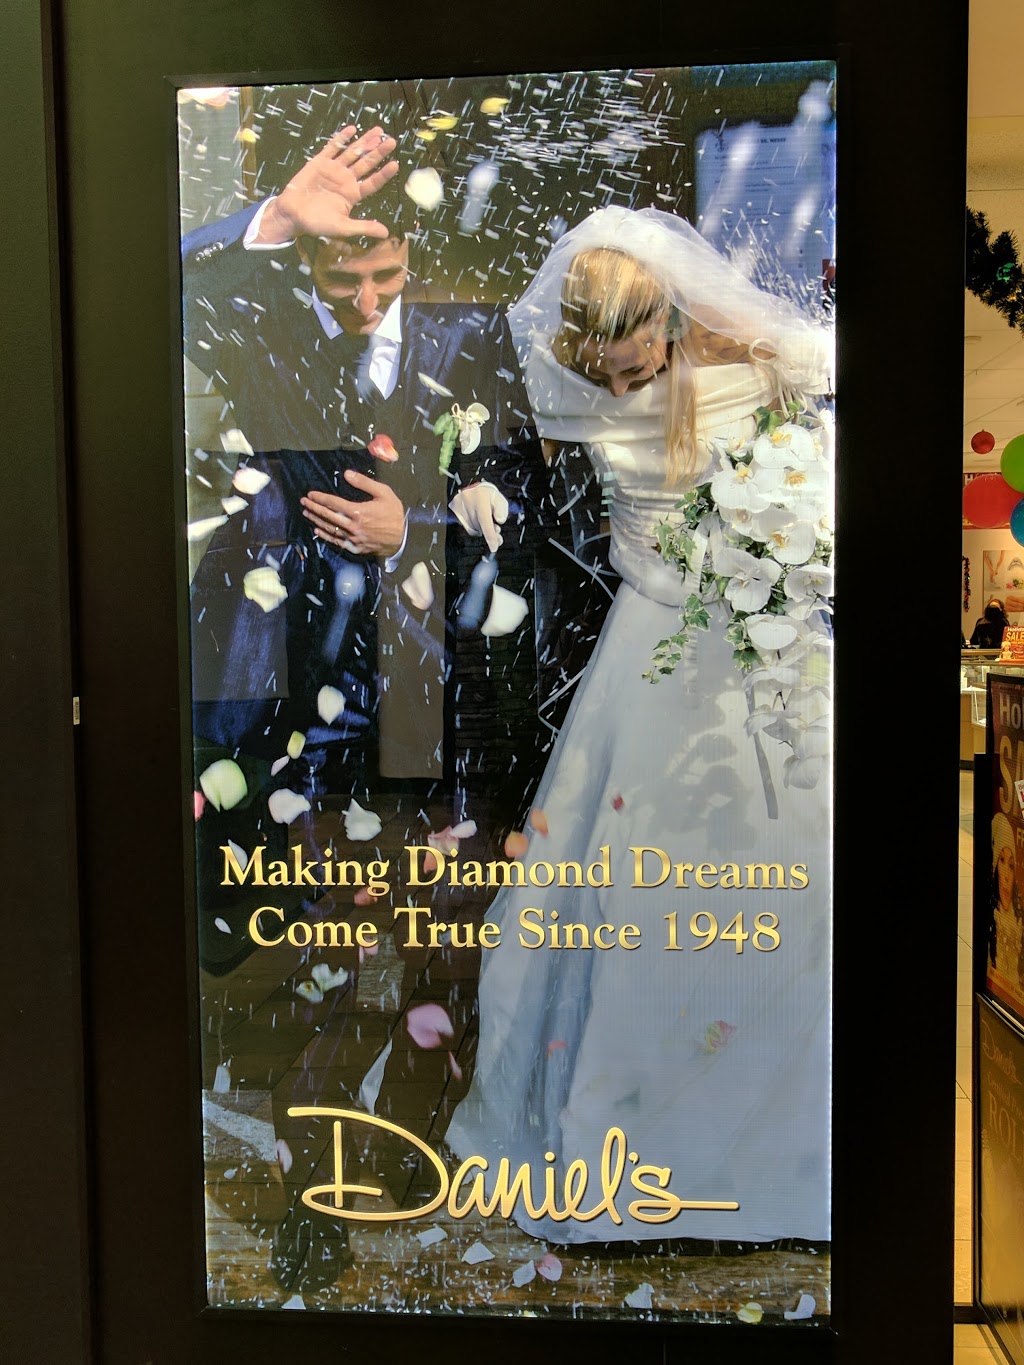 Daniels Jewelers | 412 Great Mall Dr, Milpitas, CA 95035, USA | Phone: (408) 457-0740